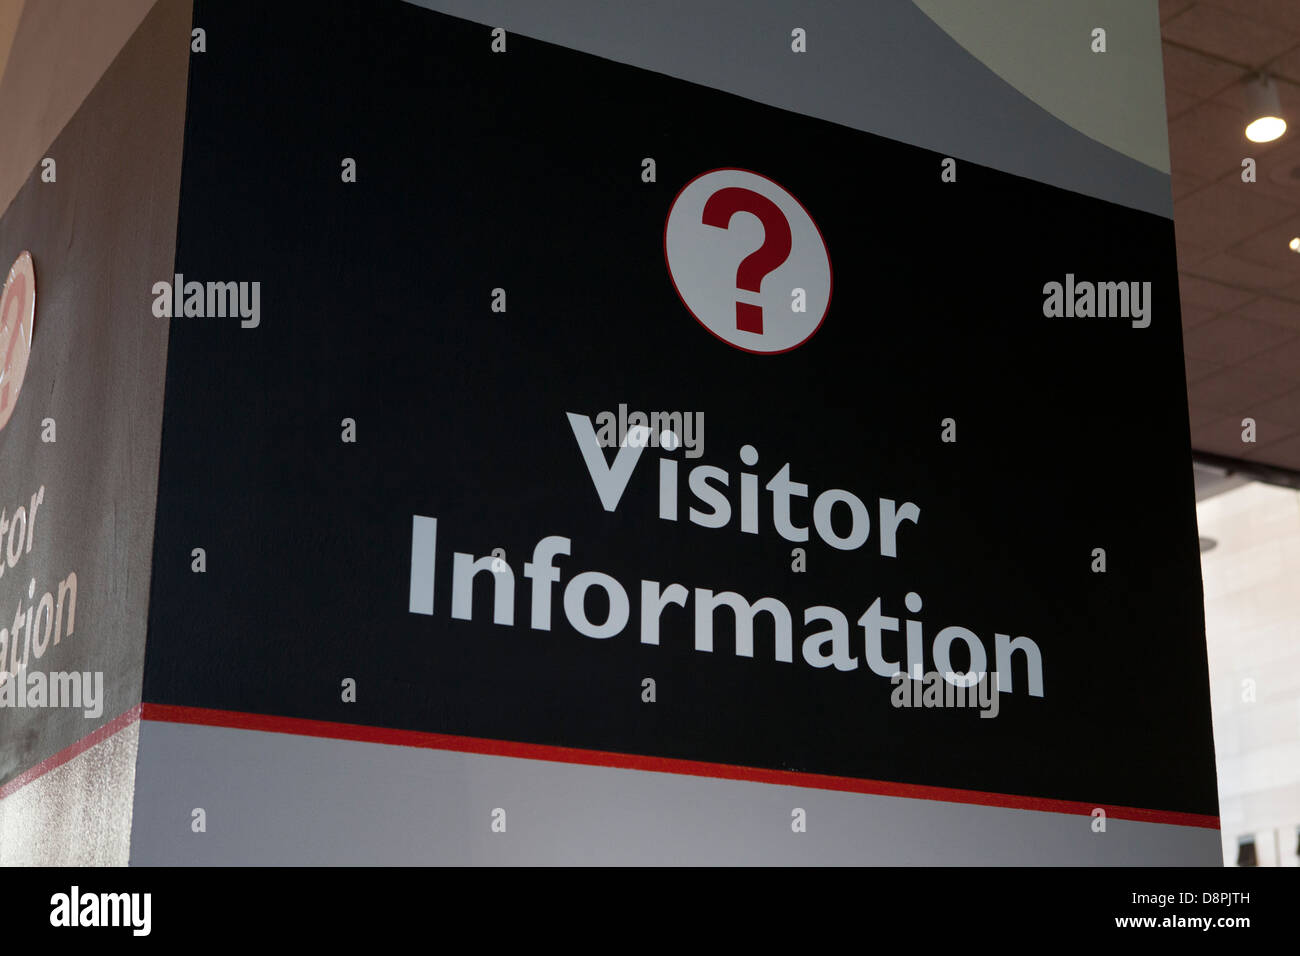 Visitor information sign - USA Stock Photo